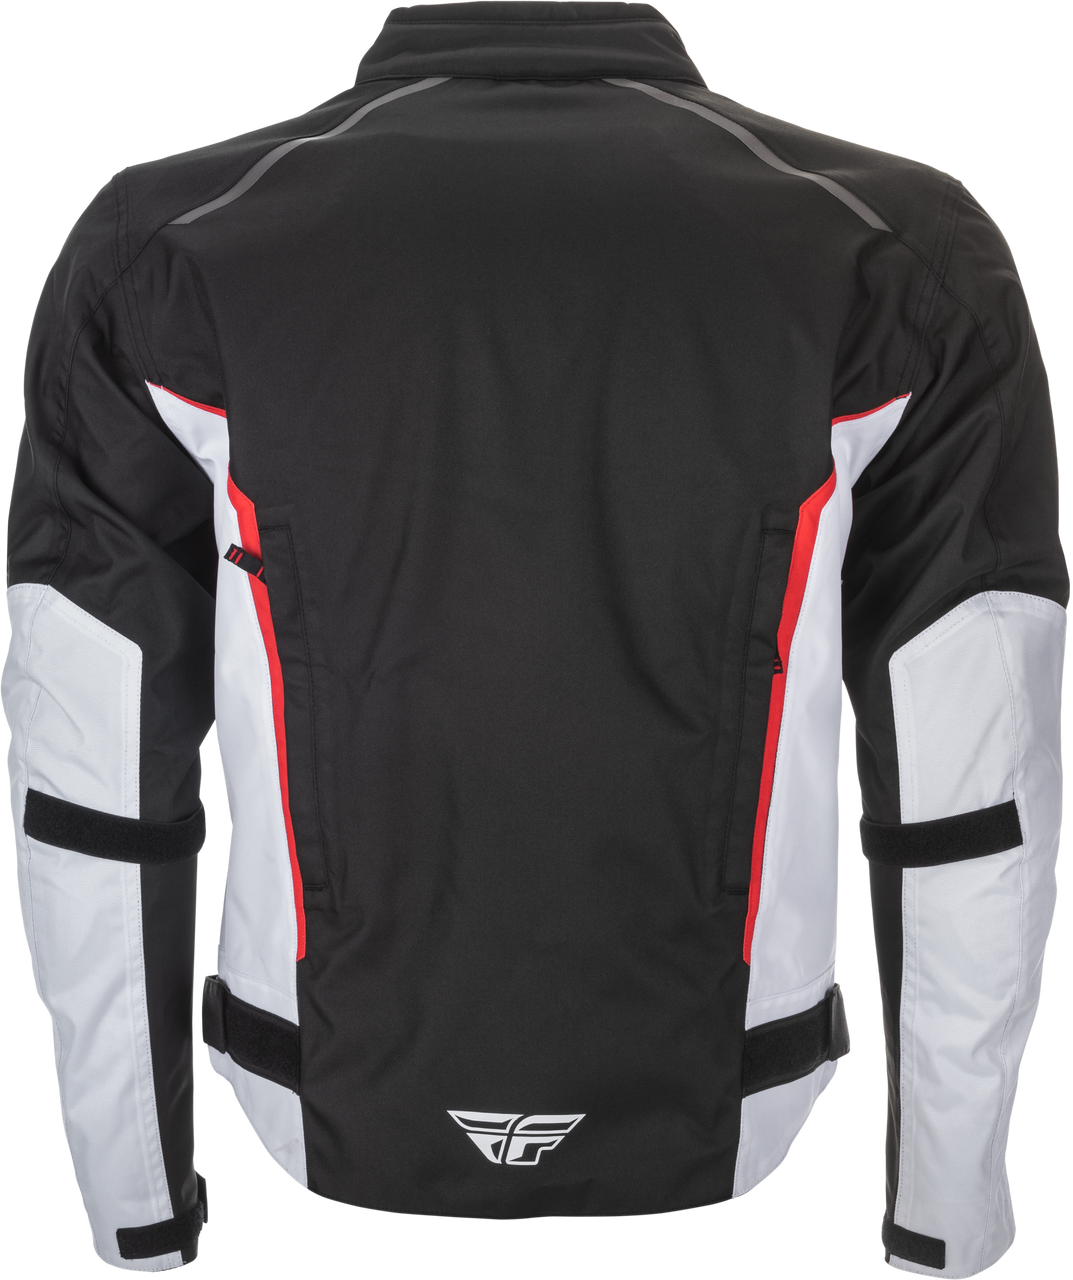 FLY Launch Jacket